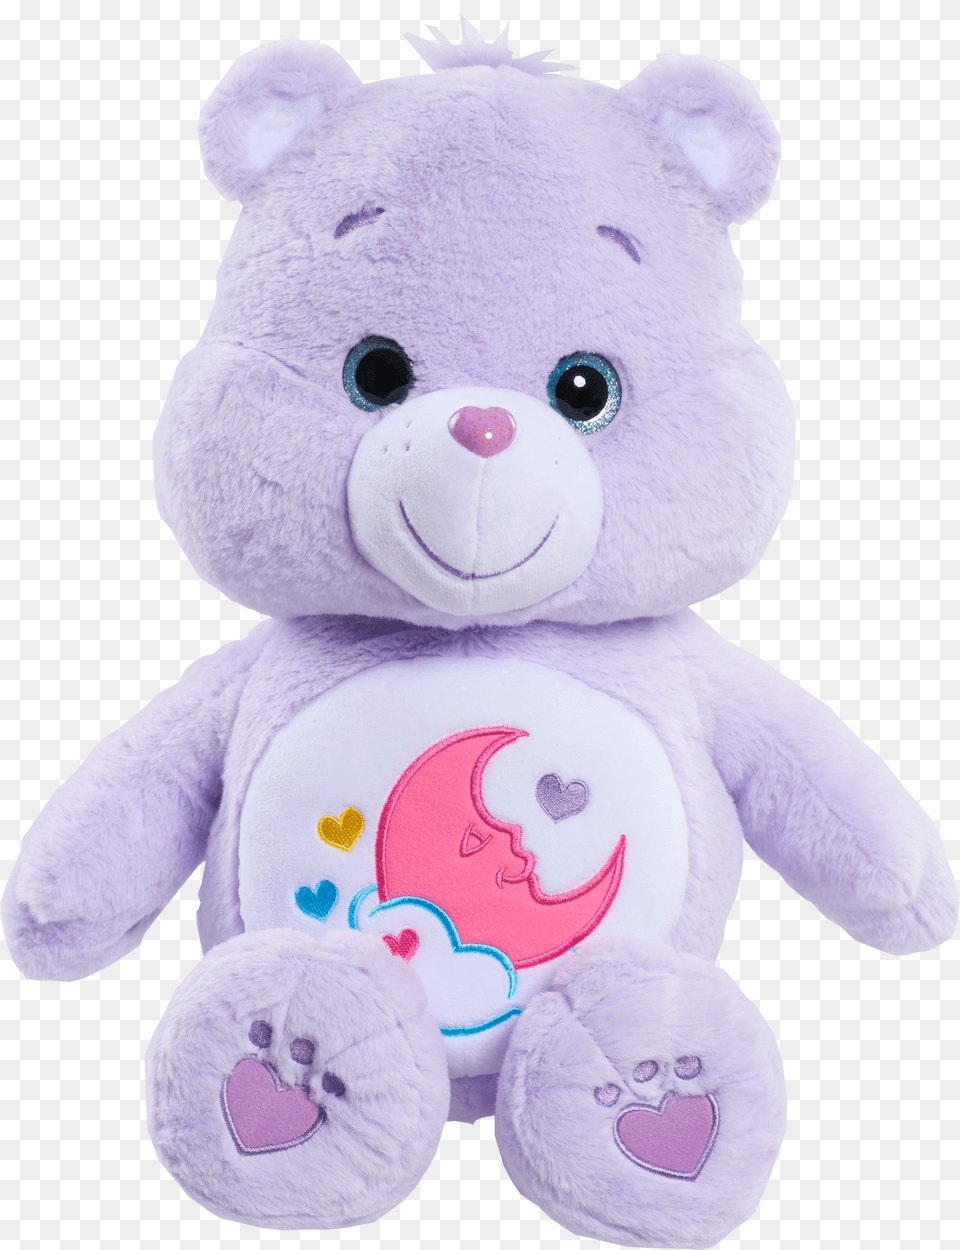 Care Bears Jumbo Plush Teddy Bear Images Download Hd Free Transparent Png